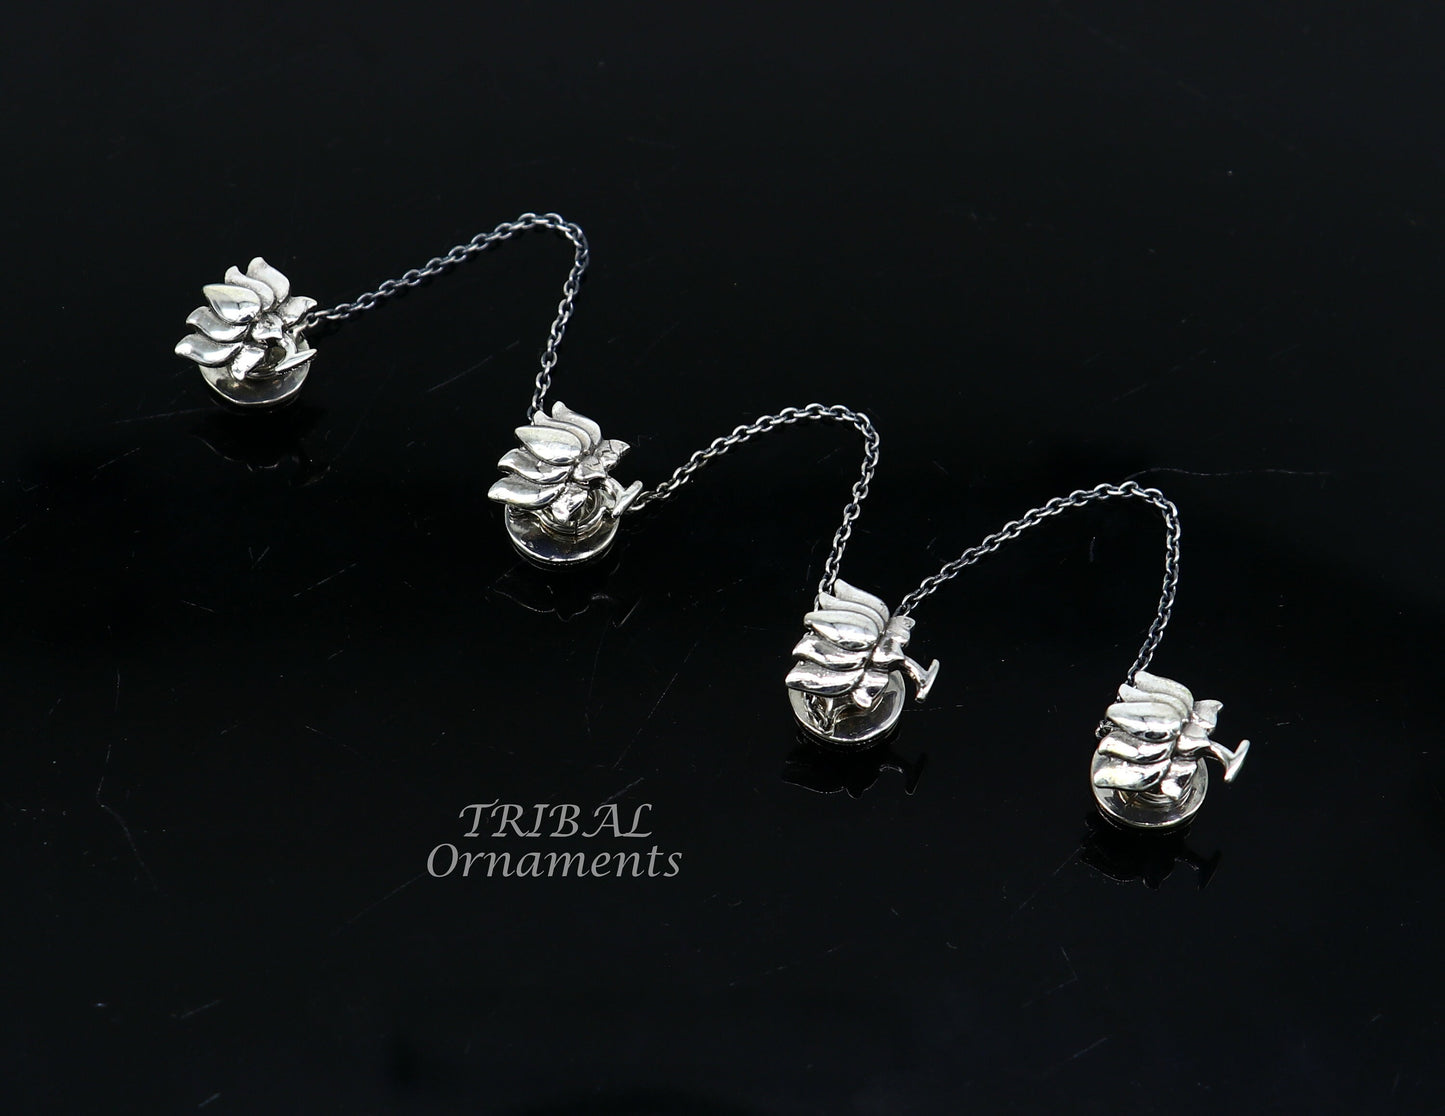 925 Sterling silver handmade amazing Indian national flower lotus design buttons for men's kurta, best gifting accessories btn10 - TRIBAL ORNAMENTS